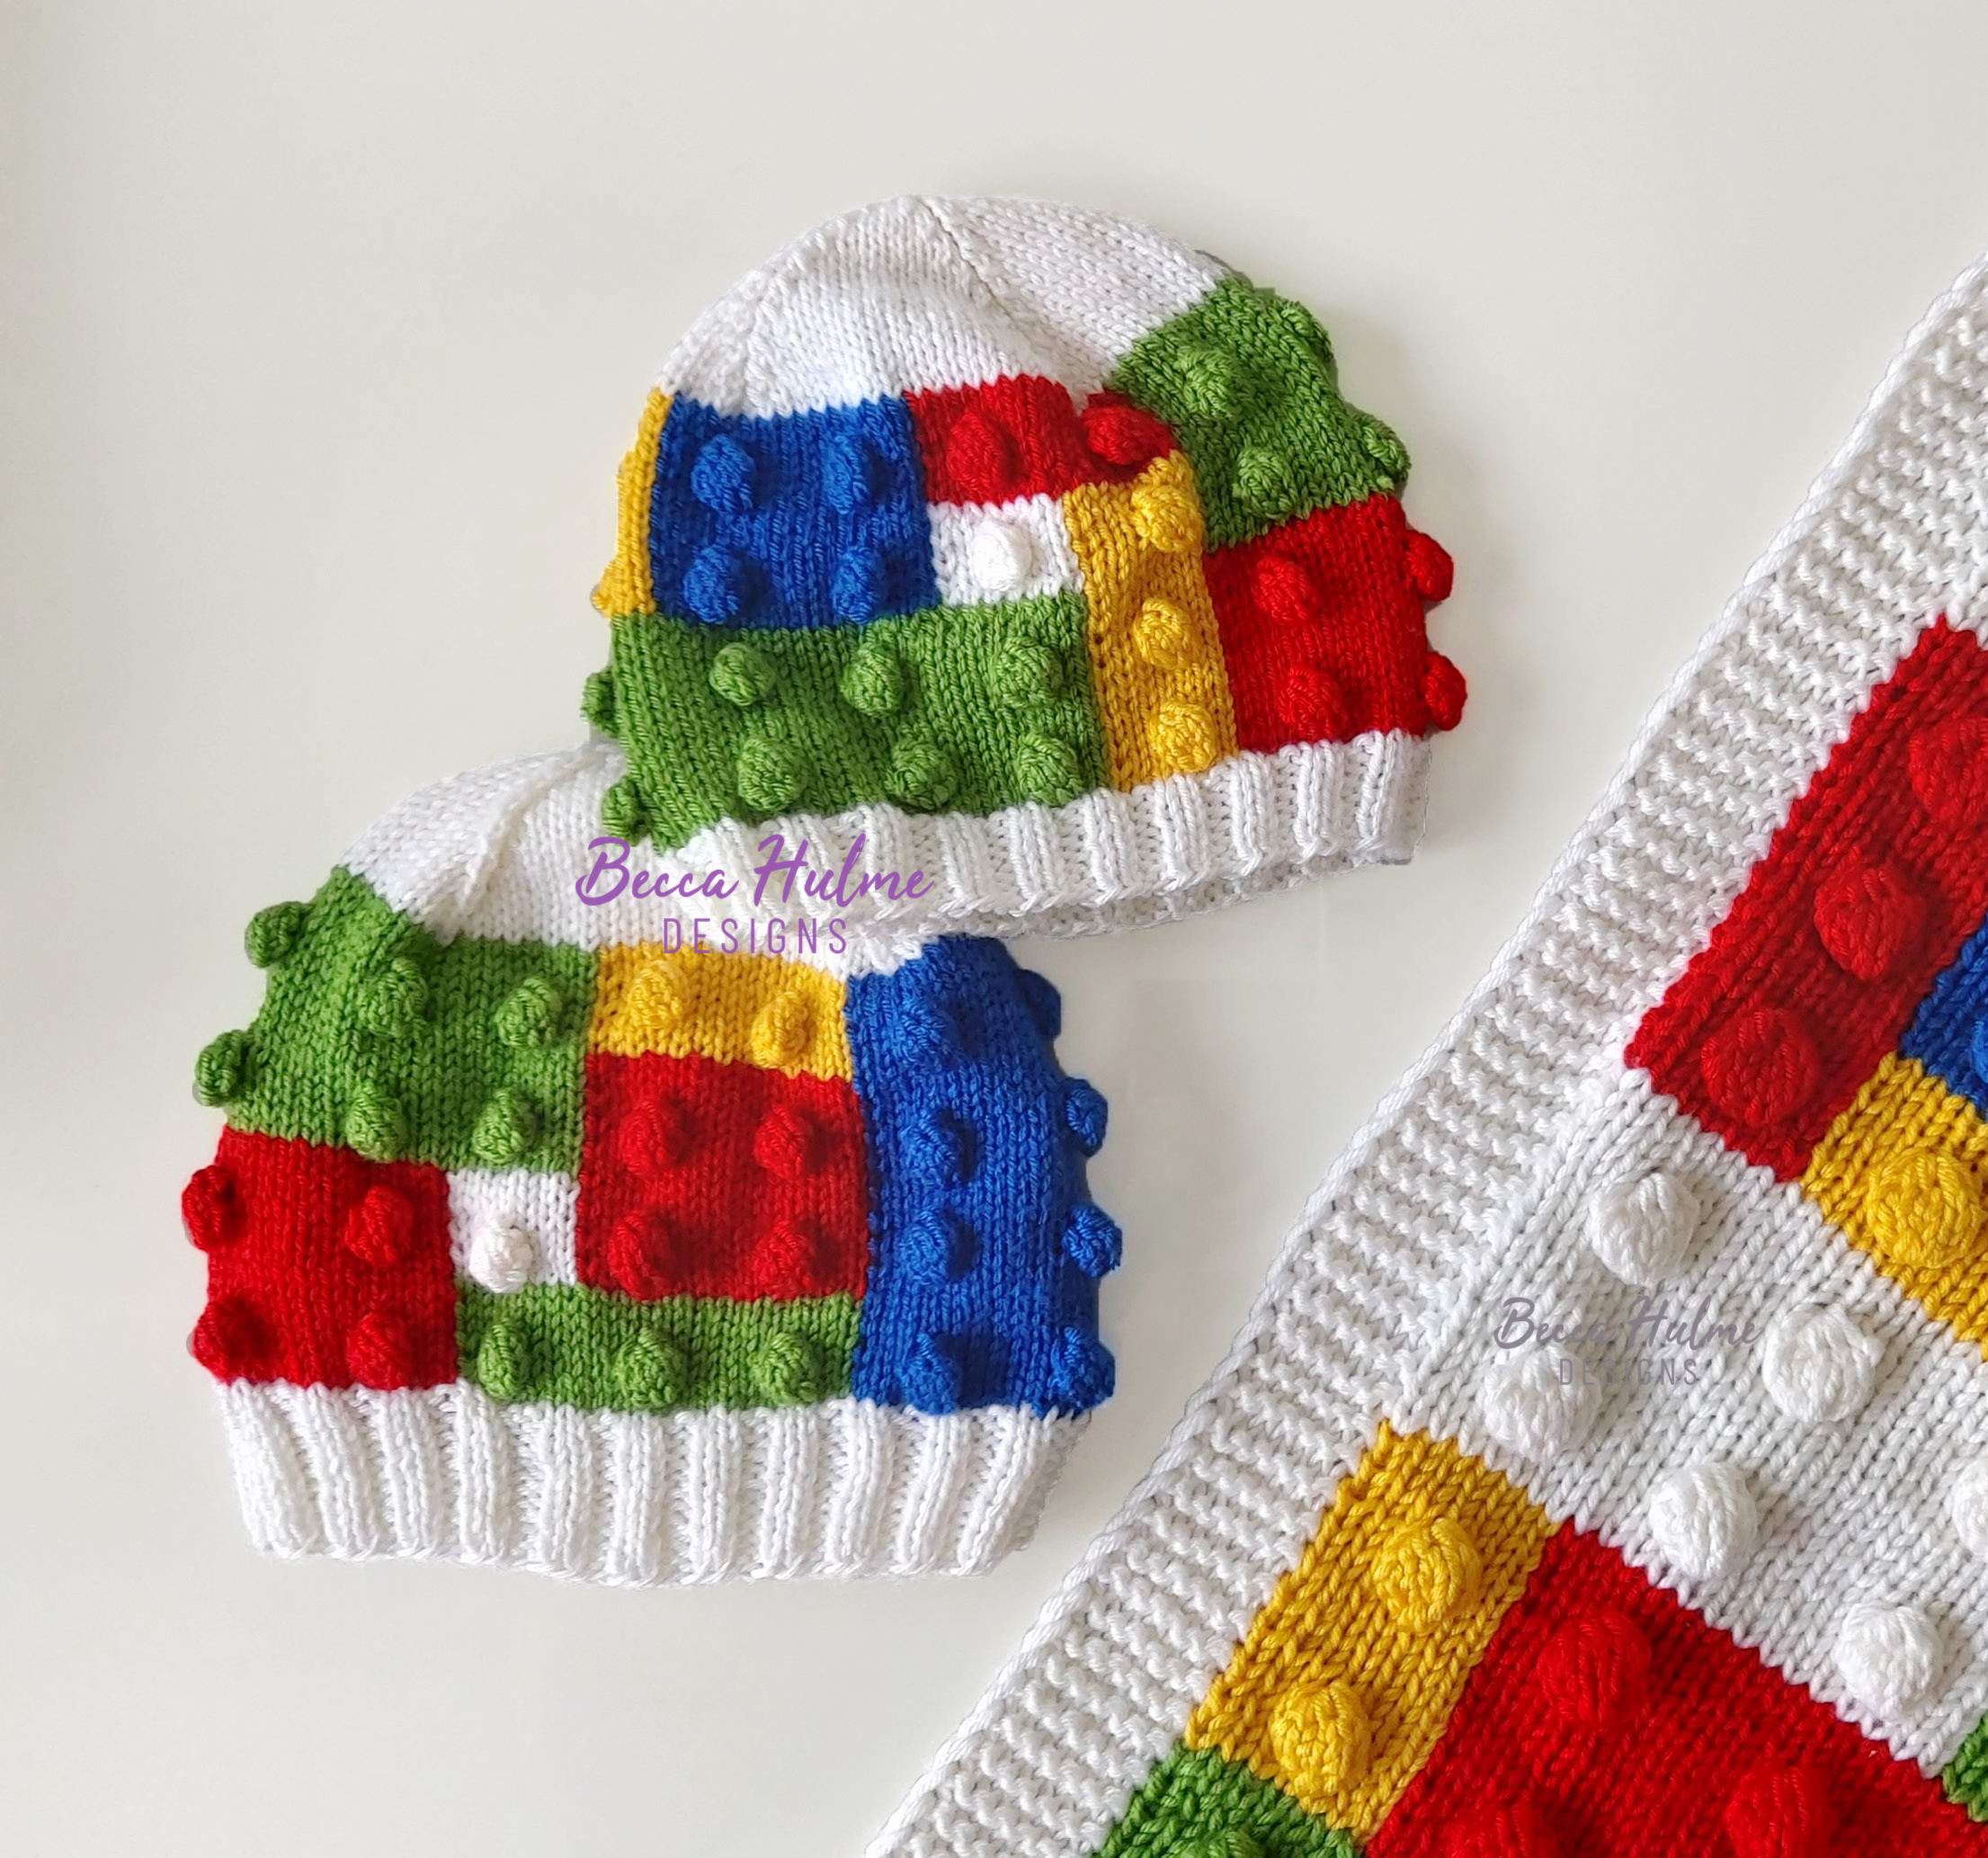 Two colourful knitted hats laid on a table. The design mimics children's building blocks with bobbles and colour layout. Bottom right corner is a part of the Building Blocks Blanket.